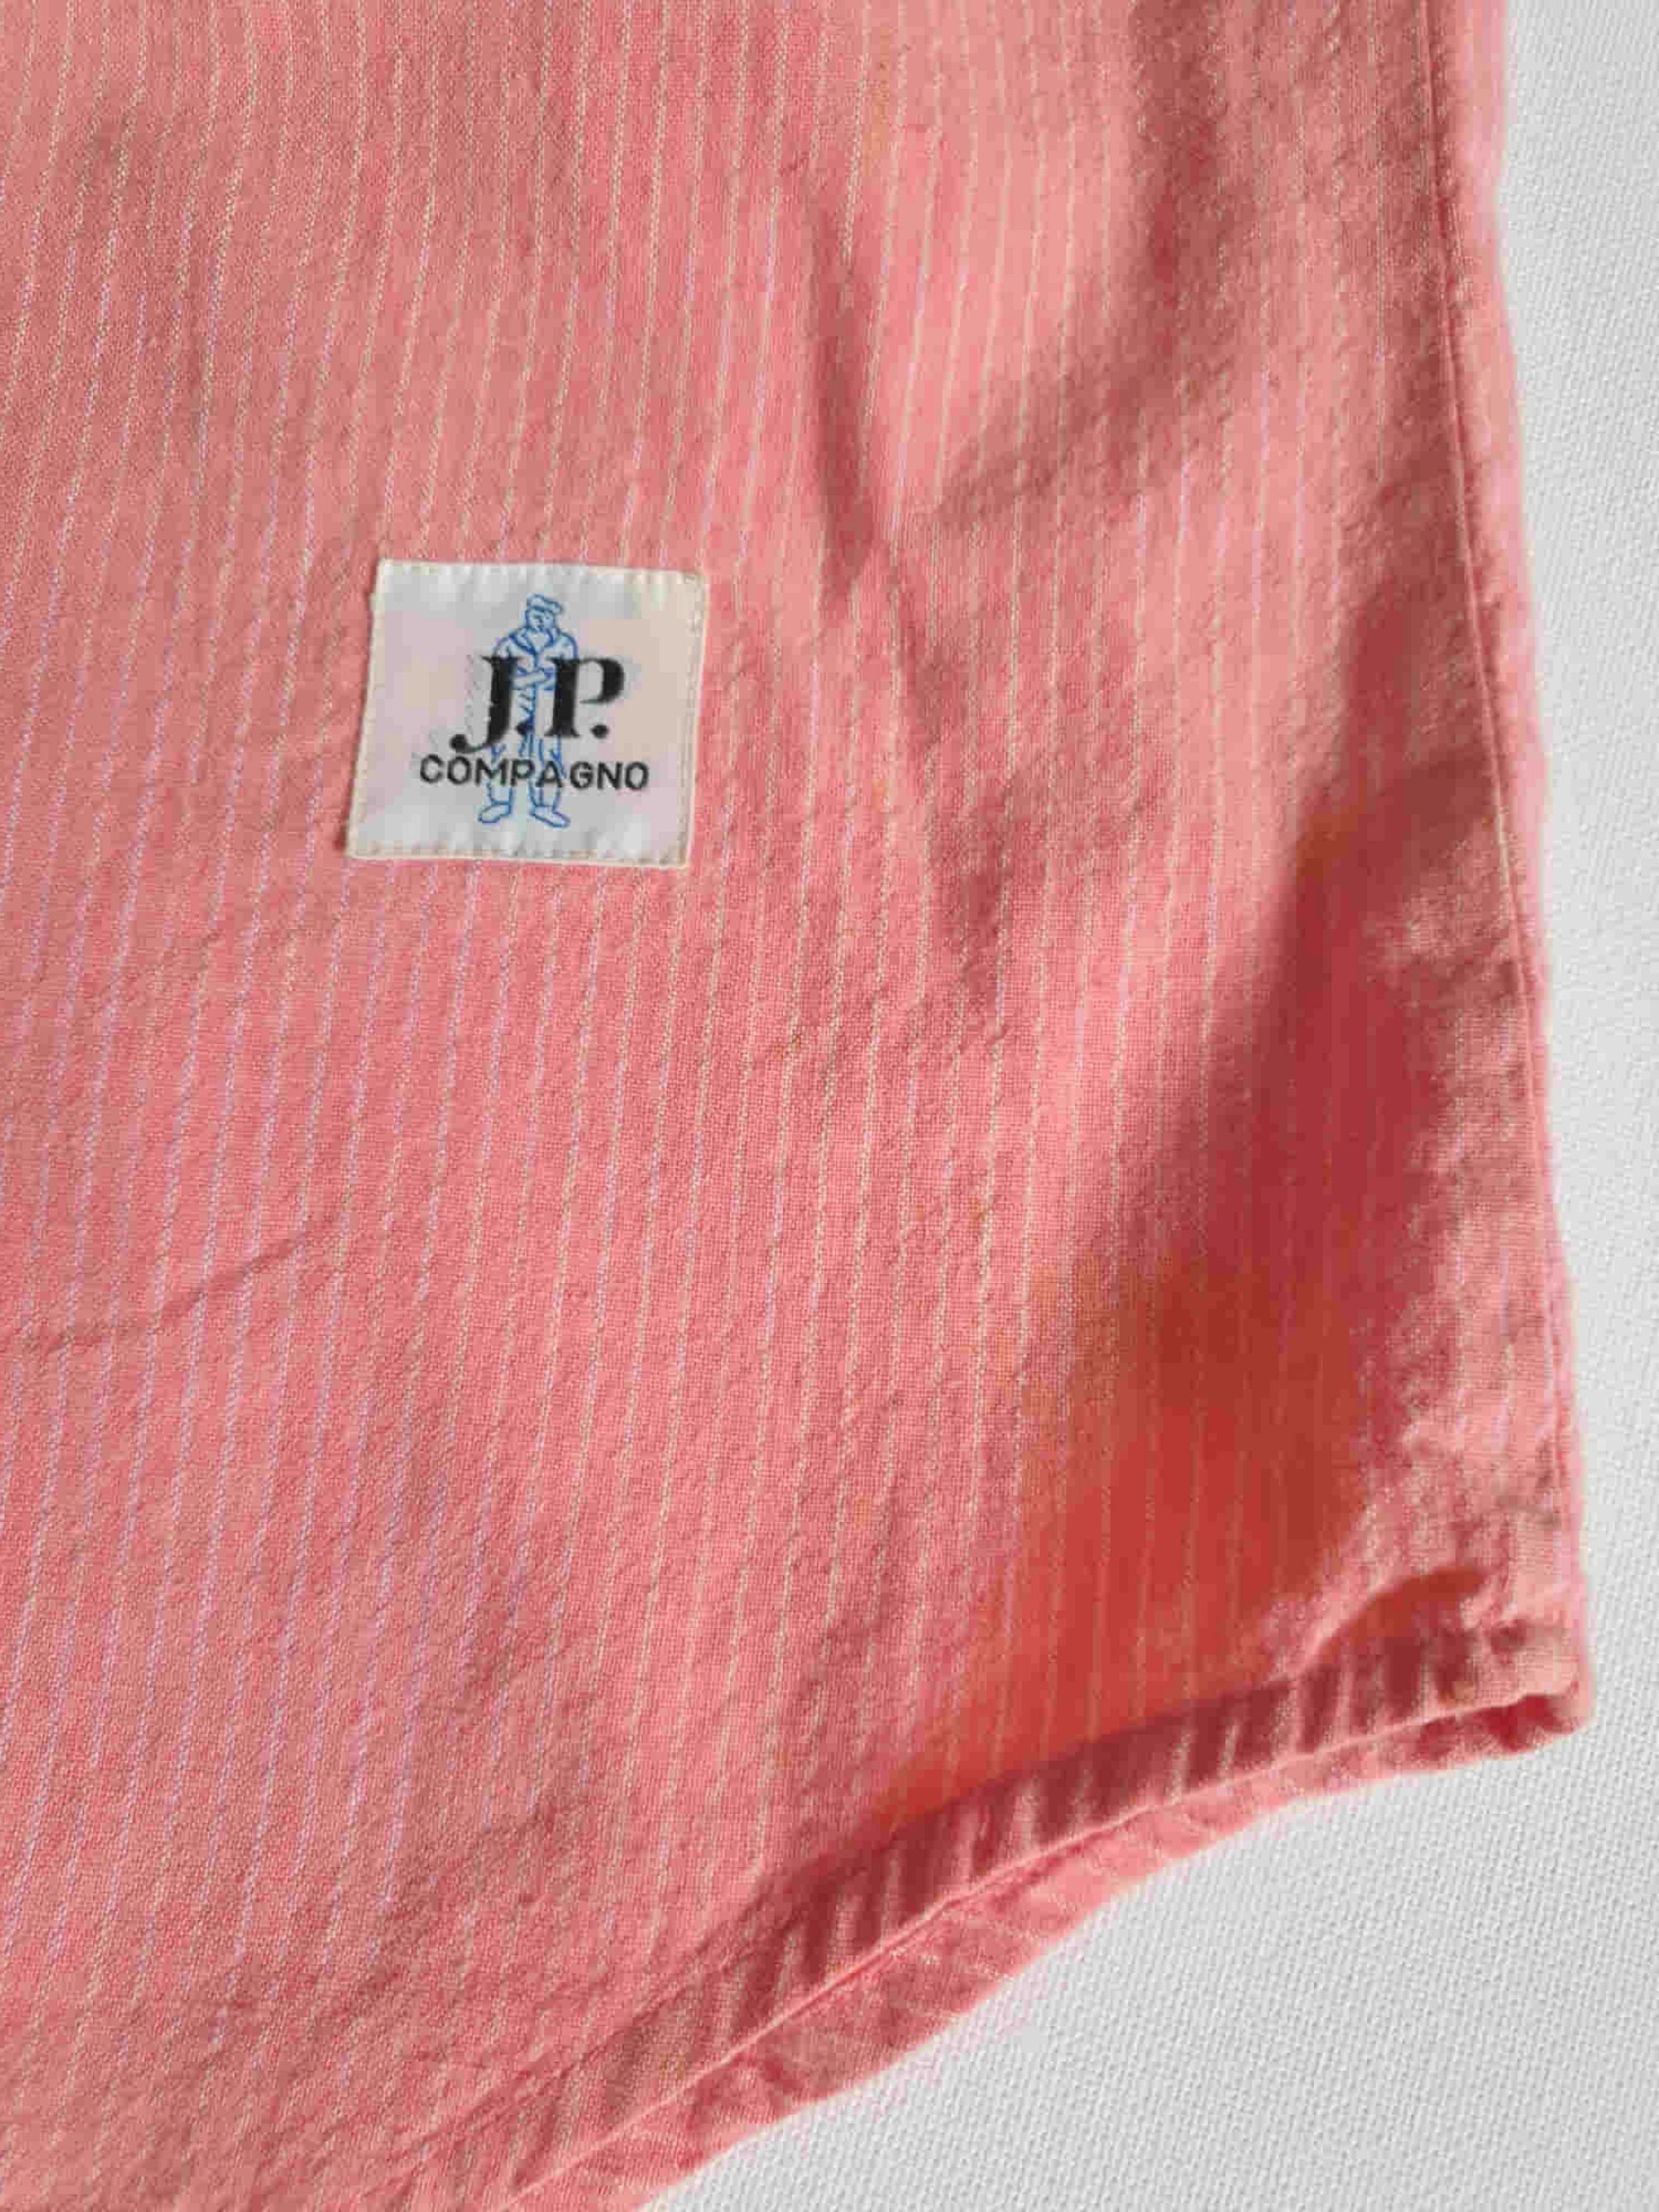 1980s vintage pink pull on shirt with band neck by JP compagno